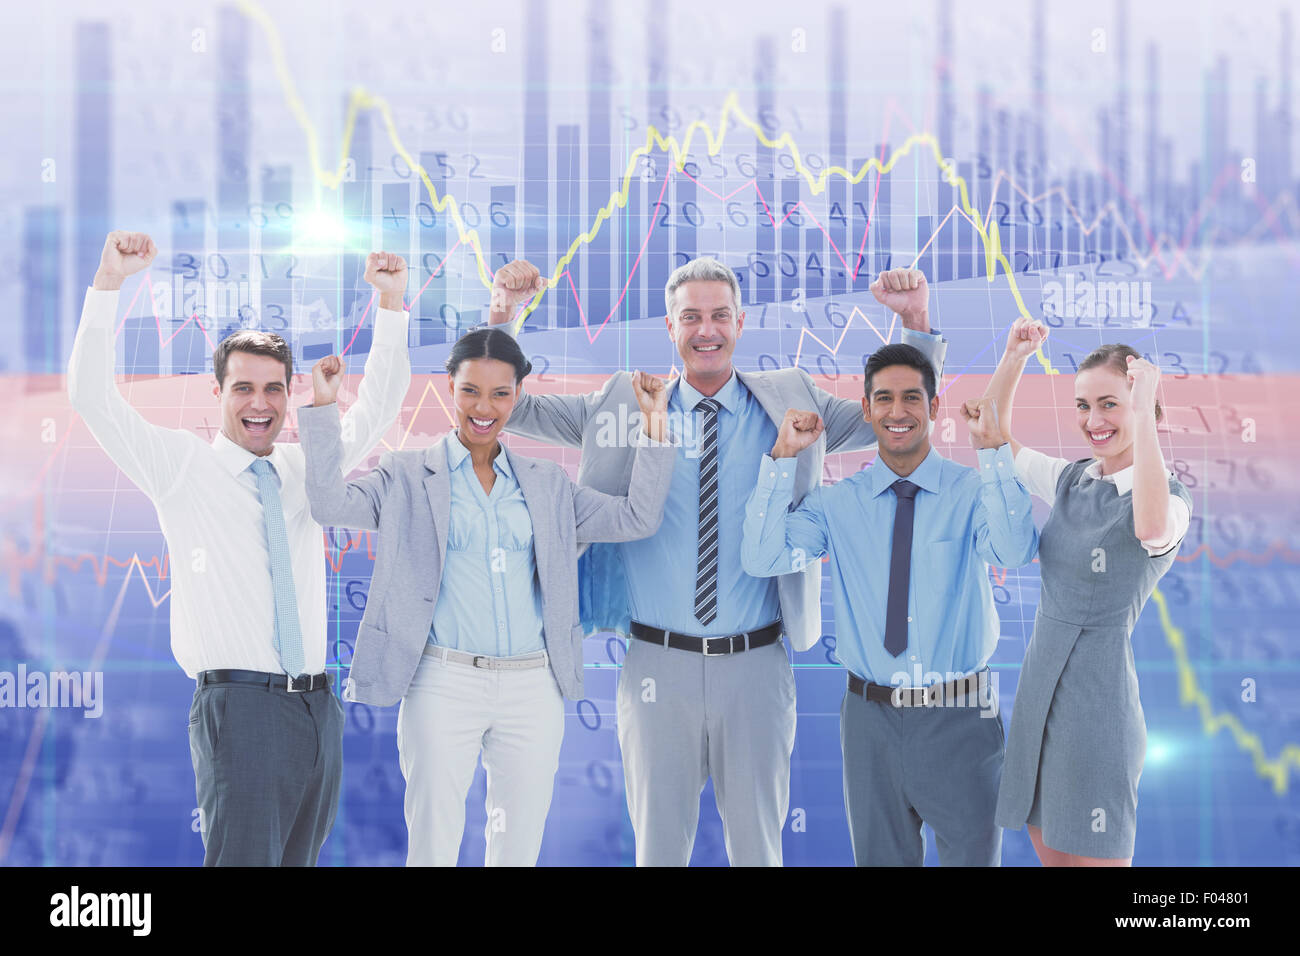 Composite image of business people cheering in office Stock Photo